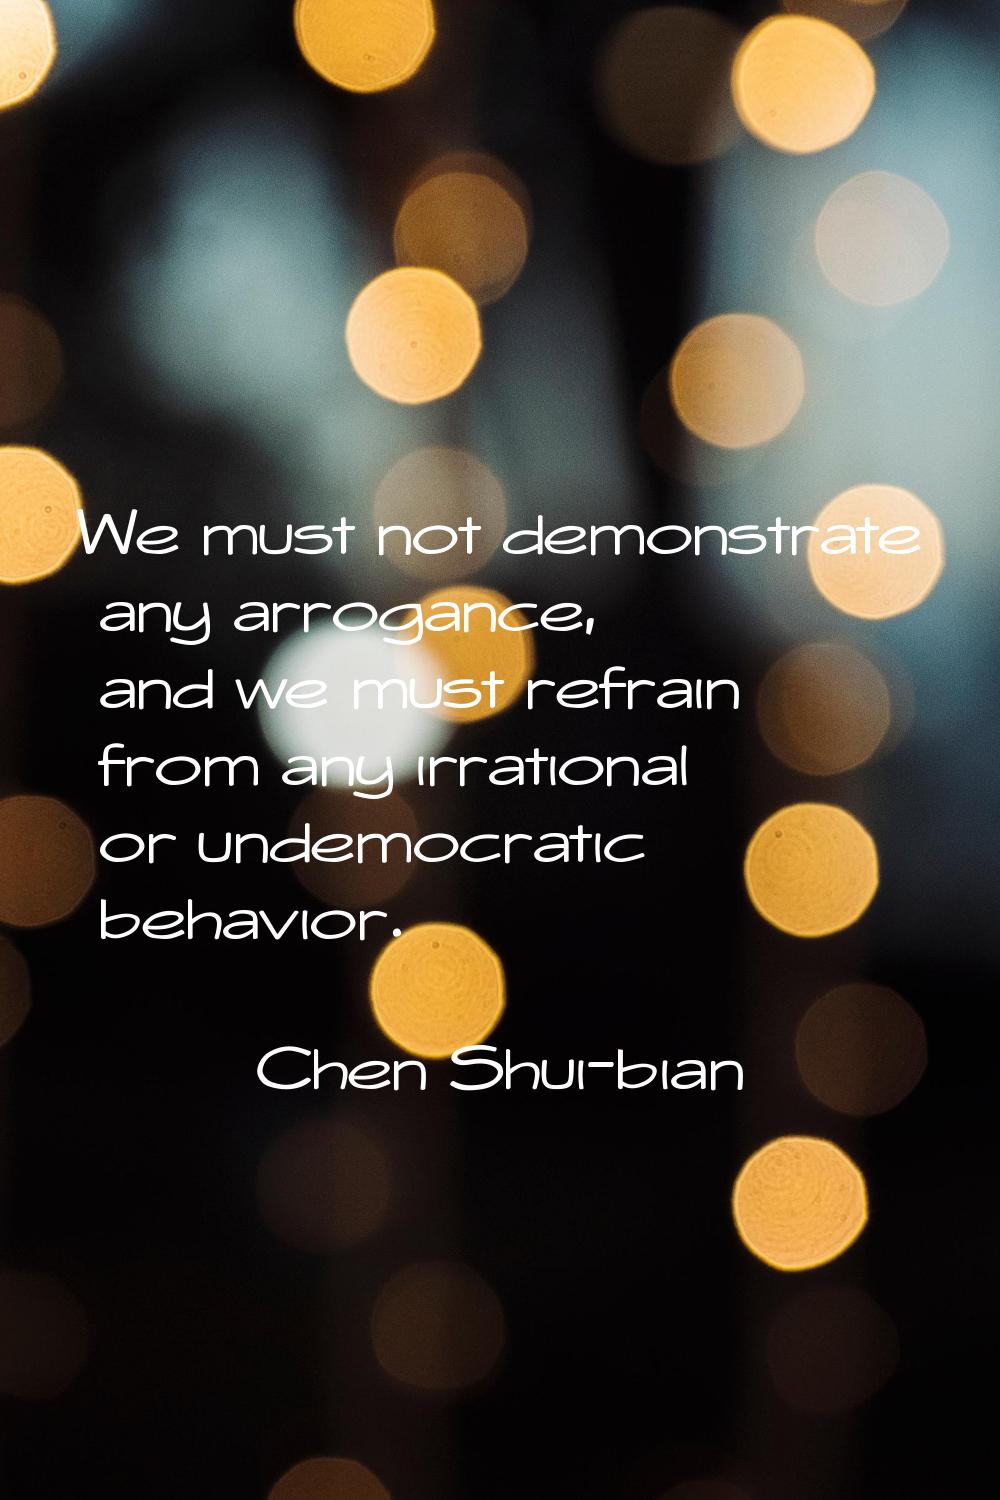 We must not demonstrate any arrogance, and we must refrain from any irrational or undemocratic beha